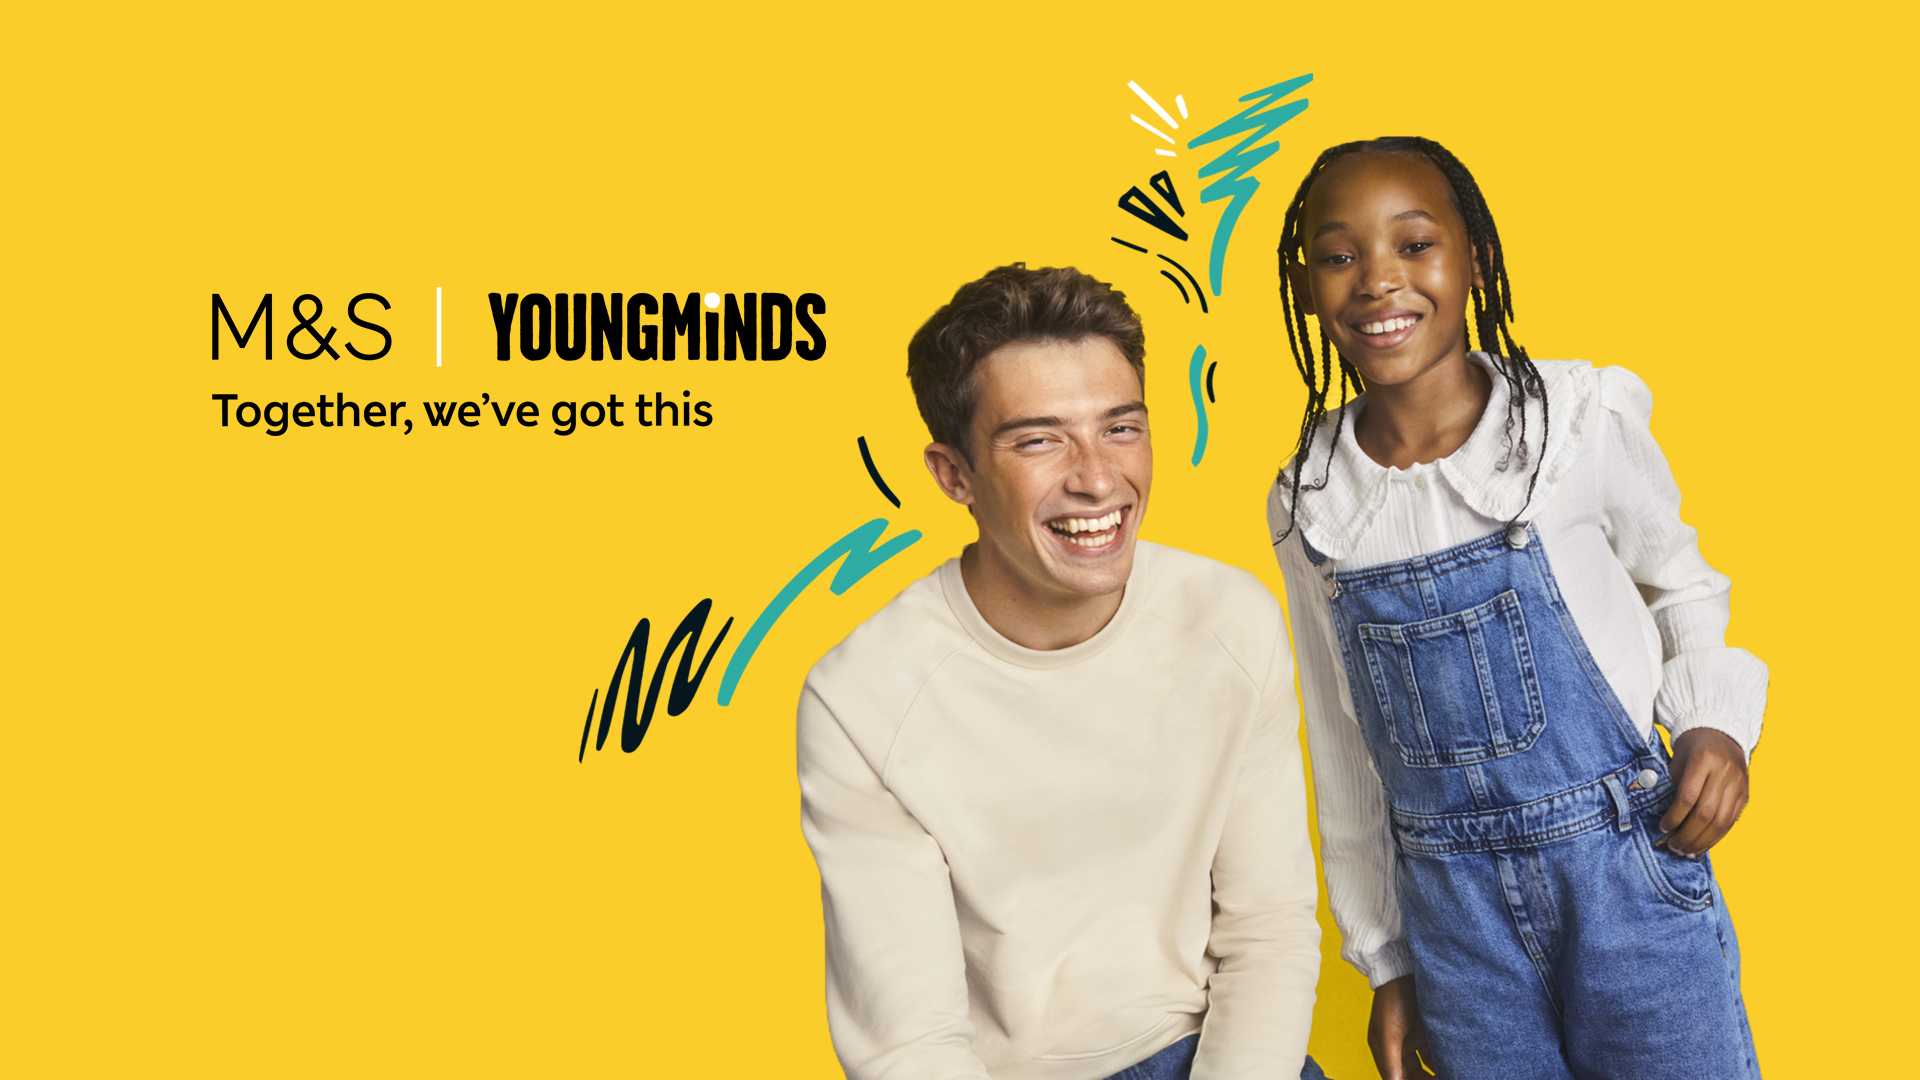 An adult and a child wearing M&S clothes smiling. Logo reads: "M&S | YoungMinds Together, we've got this"